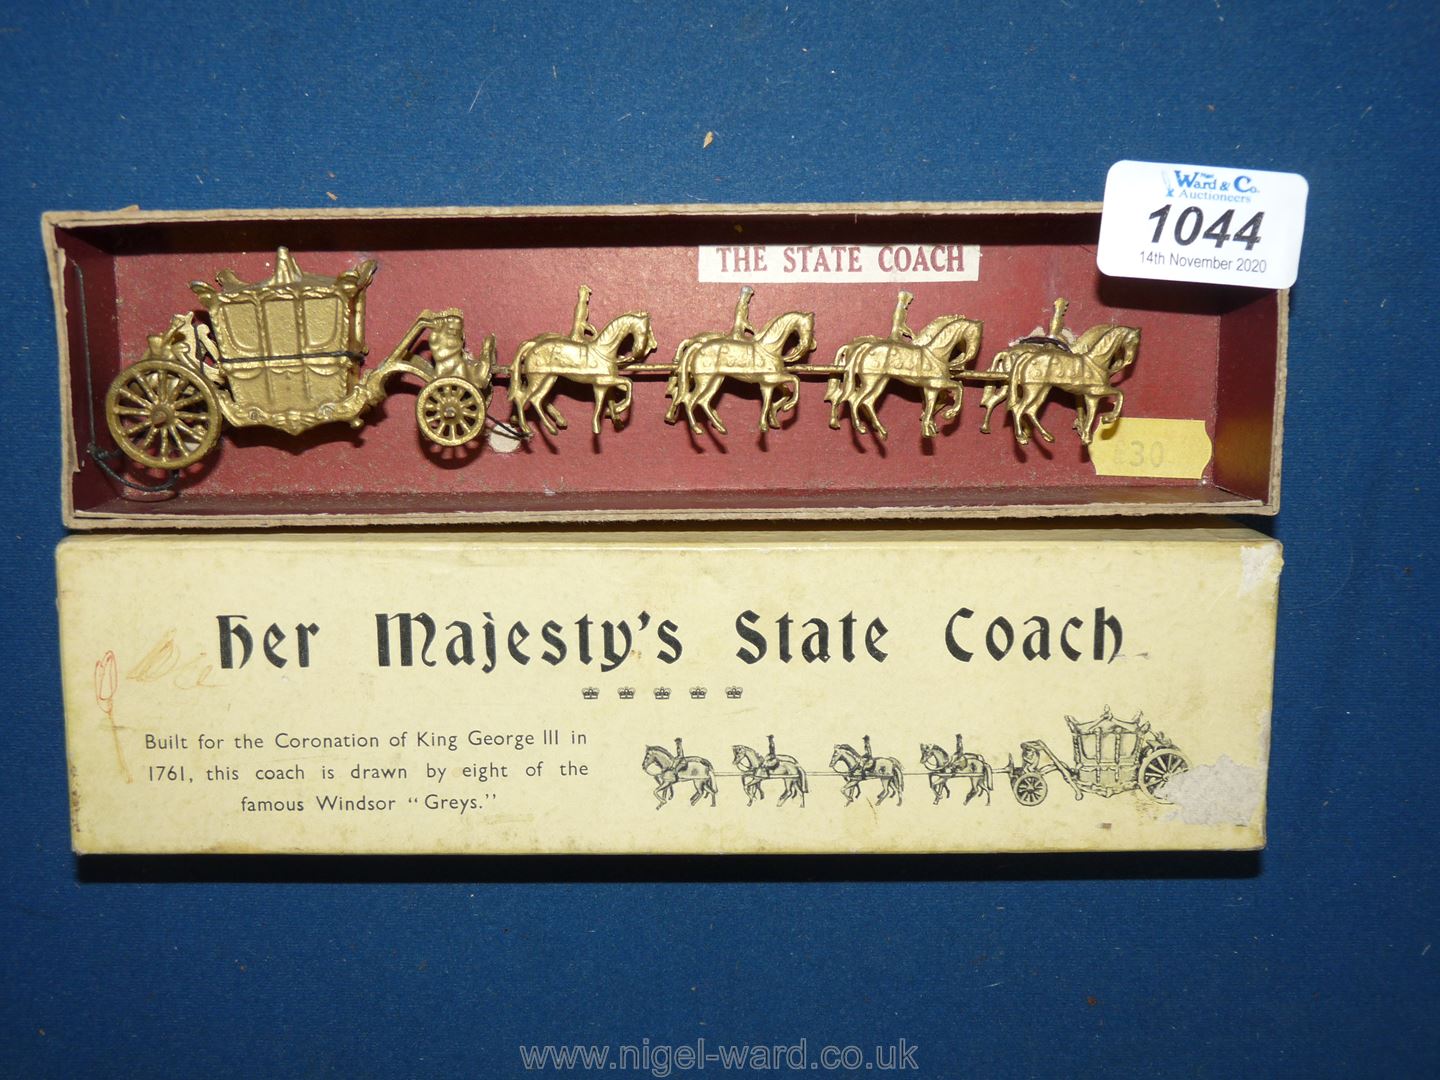 A Britain's model of the State Coach.